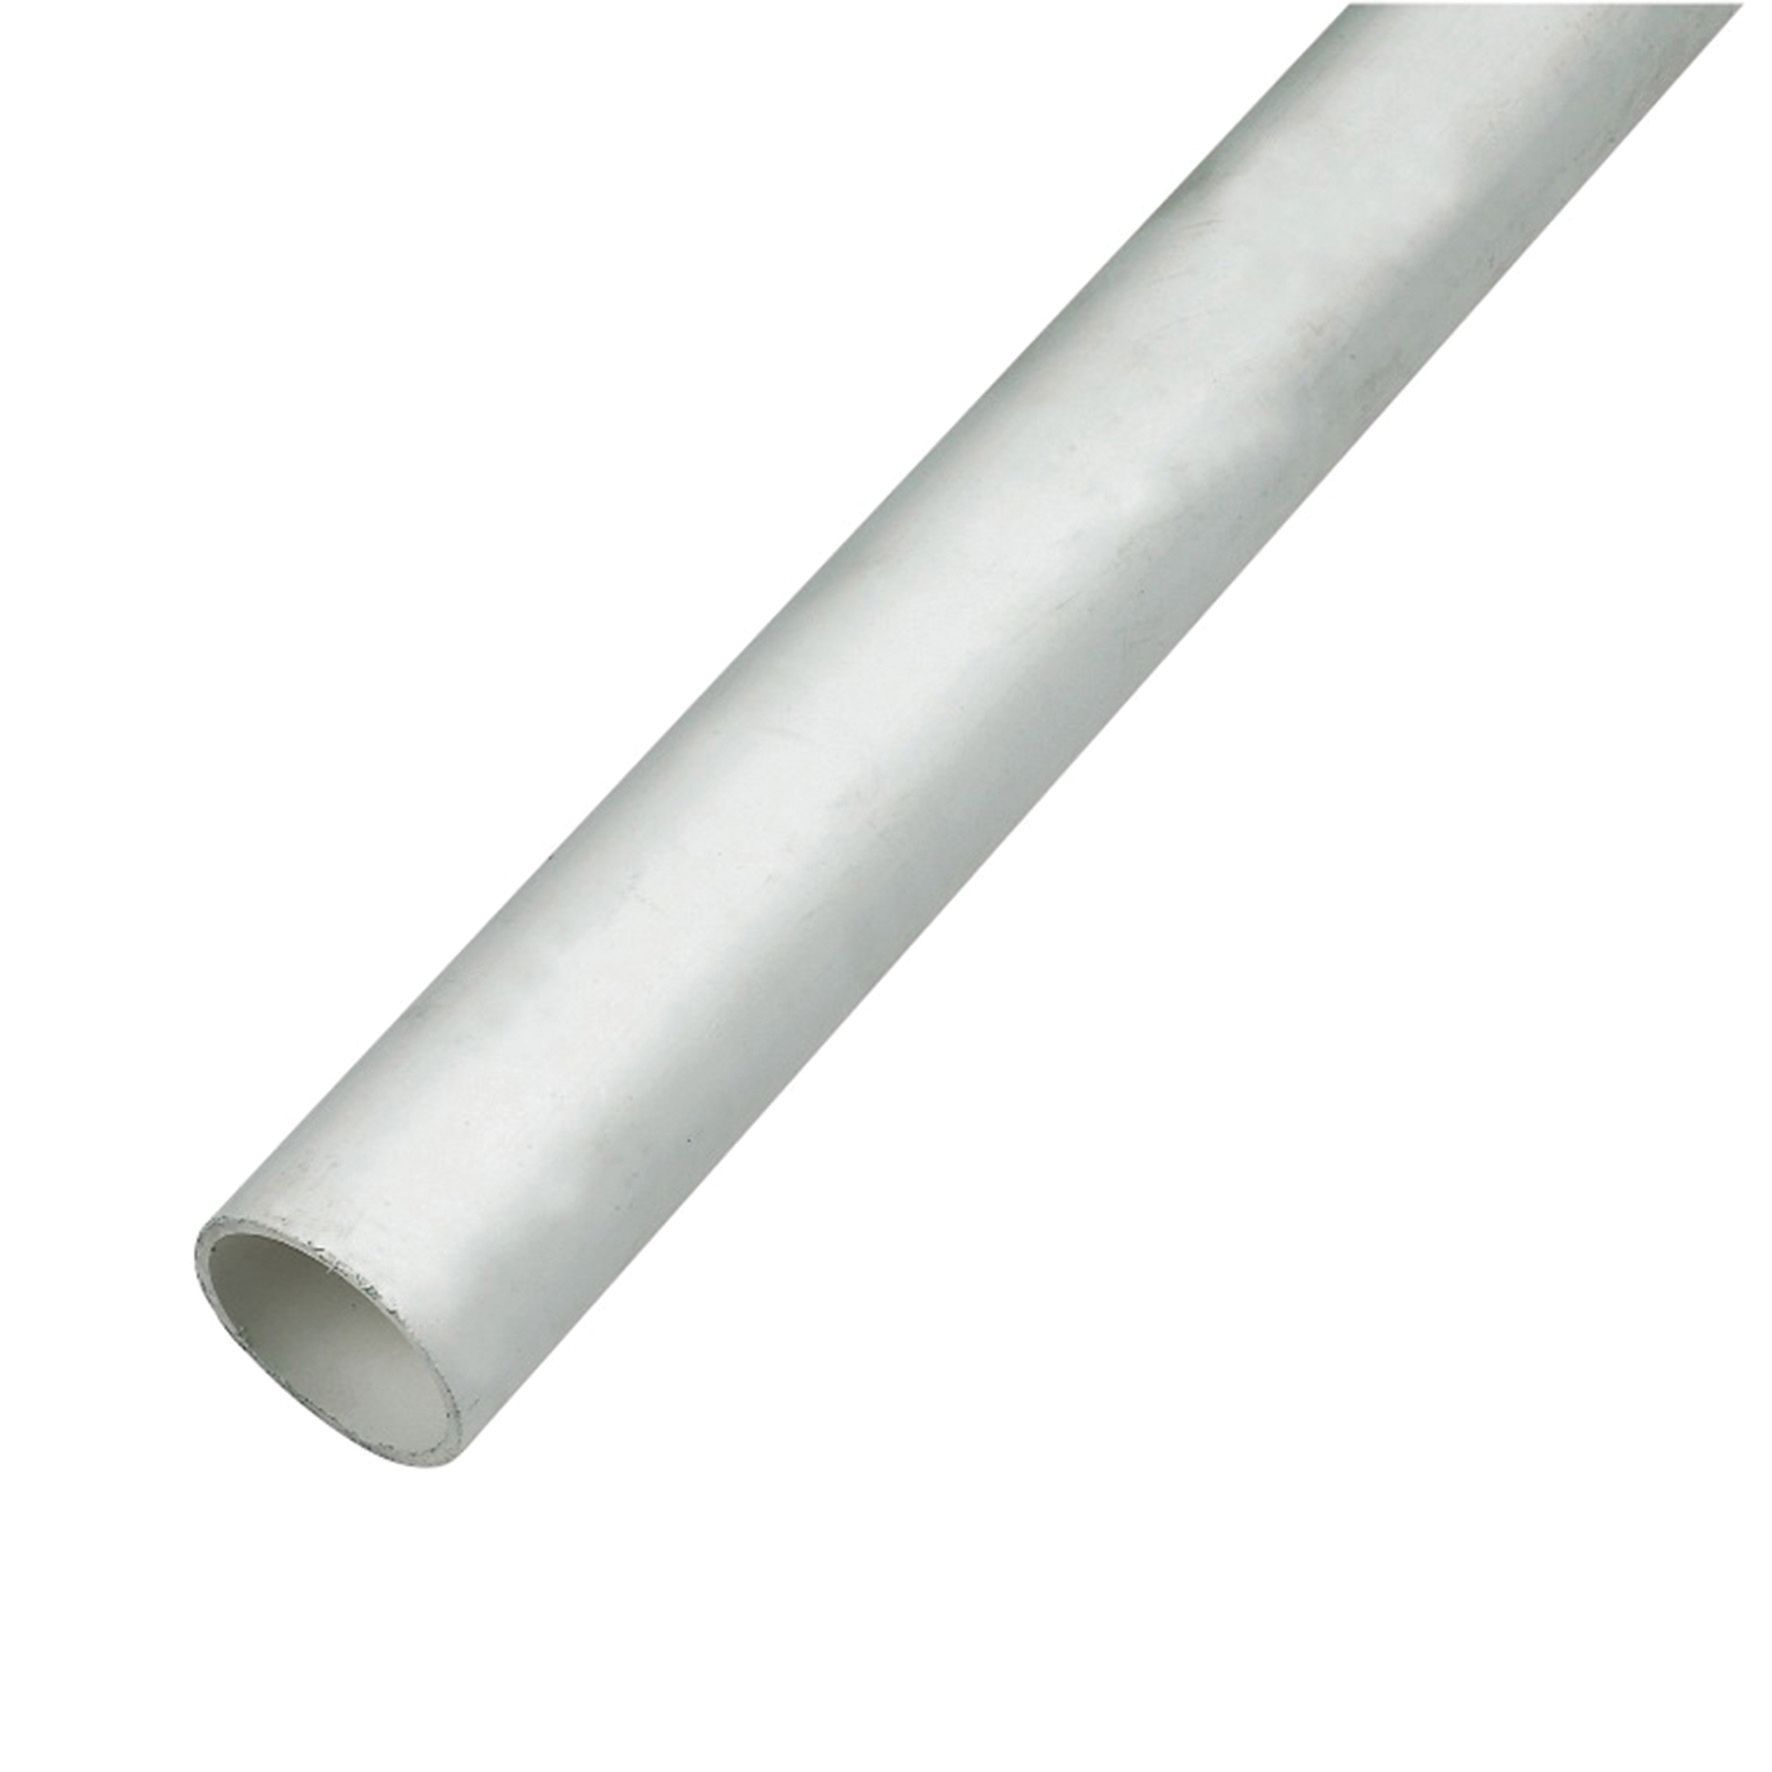 Image of FloPlast WP01W Push-fit Waste Pipe - White 32mm x 3m